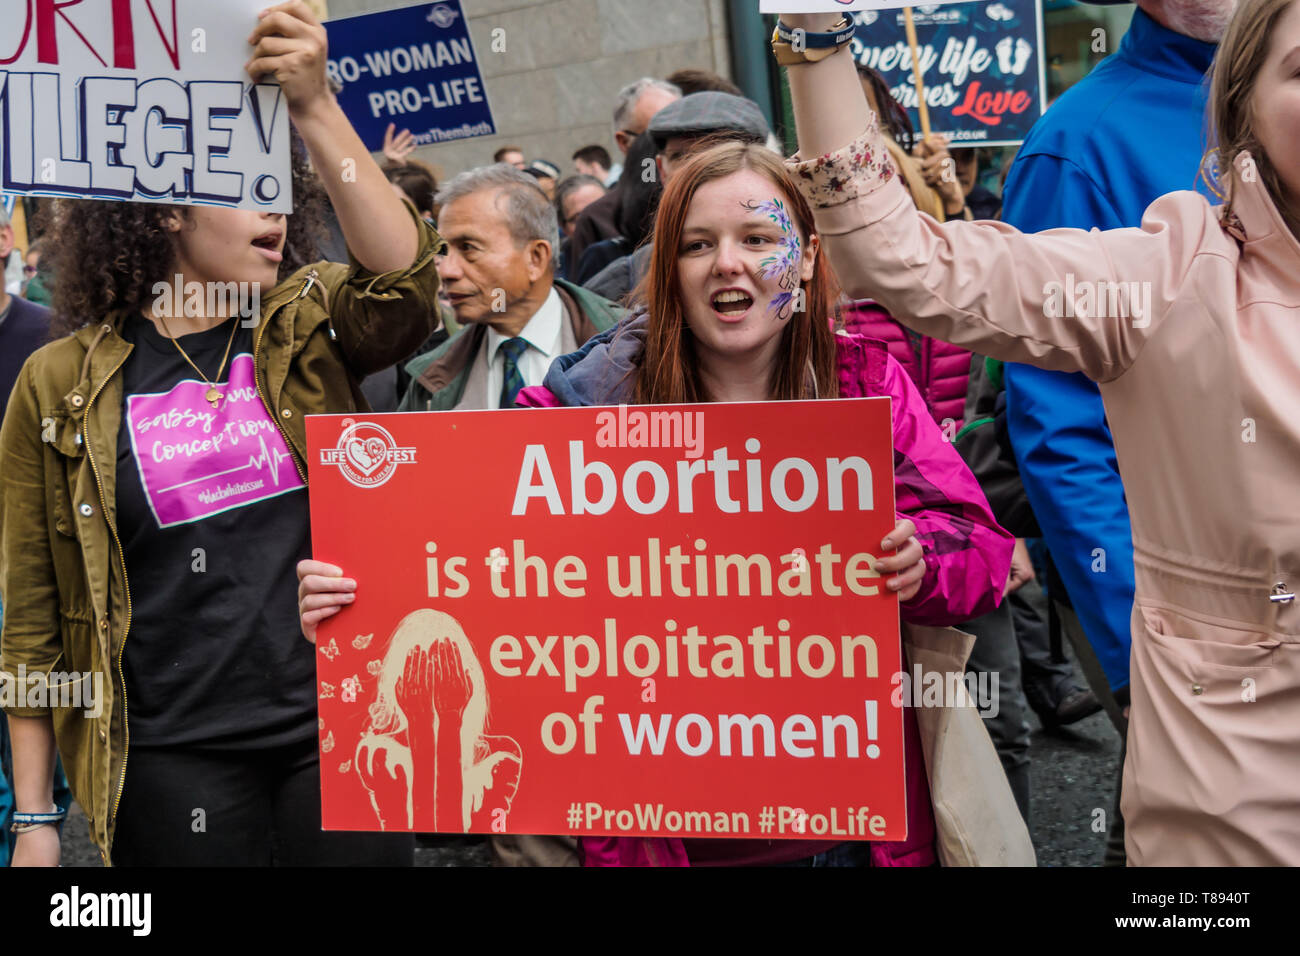 London, UK. 11th May 2019. The March for Life UK, a largely Catholic event, marches past pro-life protesters on Victoria St. Based on extreme right protests in the USA opposed to abortion they aim to raise awareness of the hurt and damage it causes and bring to an end what they call the greatest violation to human rights in history. Pro-choice opponents say they deny women basic rights, back harassment of women and oppose contraception, sex education and IVF fertility treatment. Peter Marshall/Alamy Live News Stock Photo